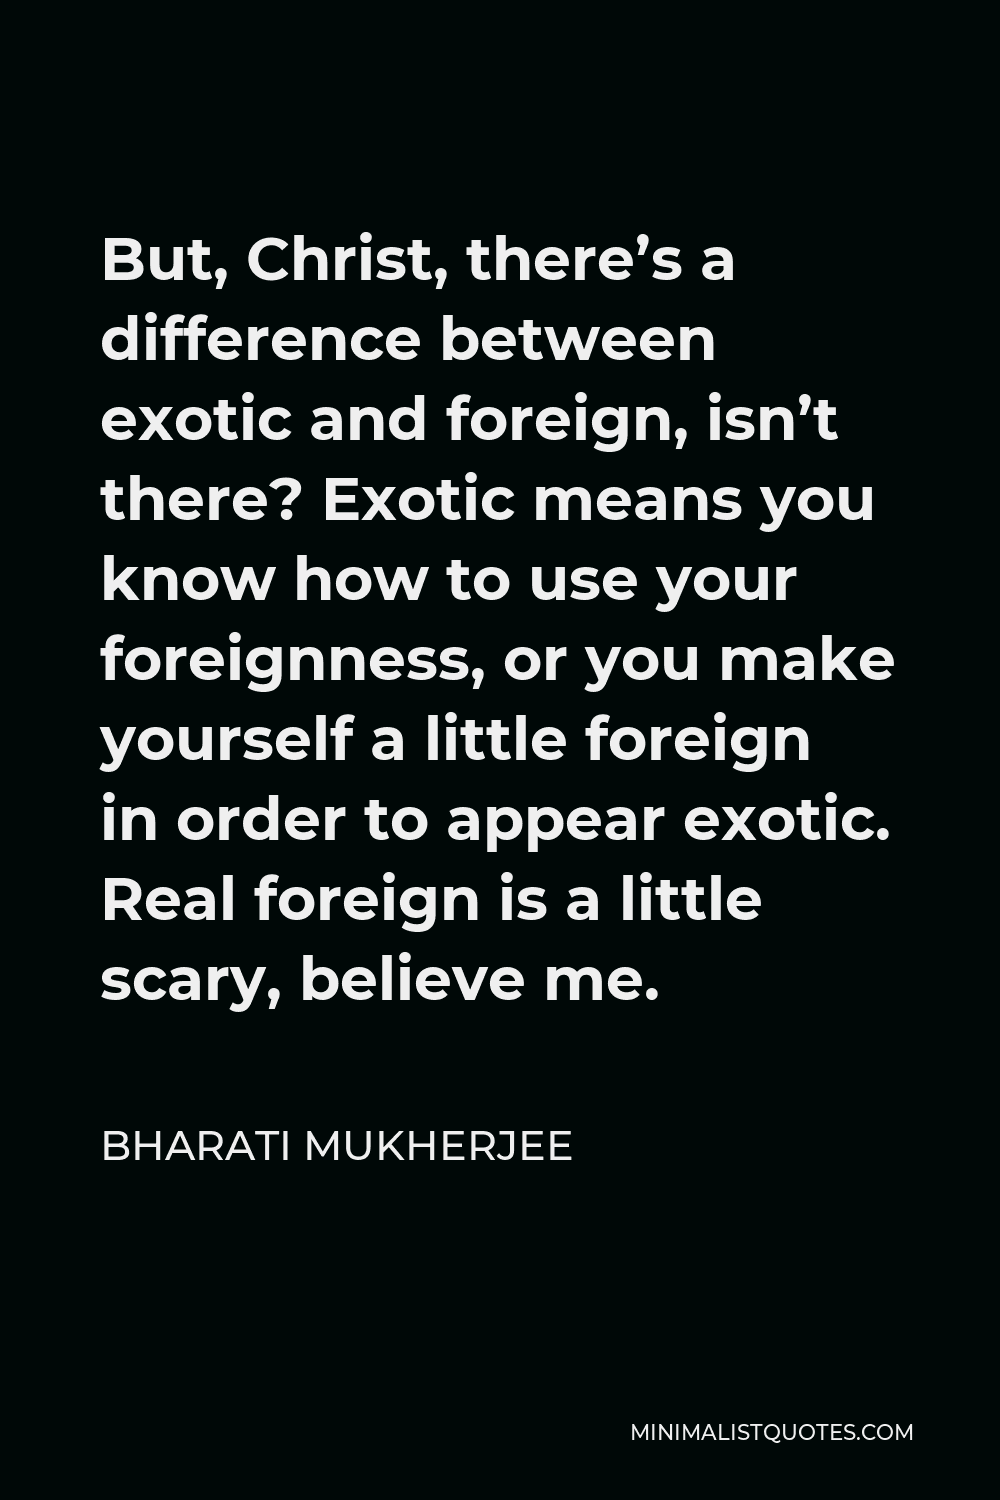 Bharati Mukherjee Quote - But, Christ, there’s a difference between exotic and foreign, isn’t there? Exotic means you know how to use your foreignness, or you make yourself a little foreign in order to appear exotic. Real foreign is a little scary, believe me.